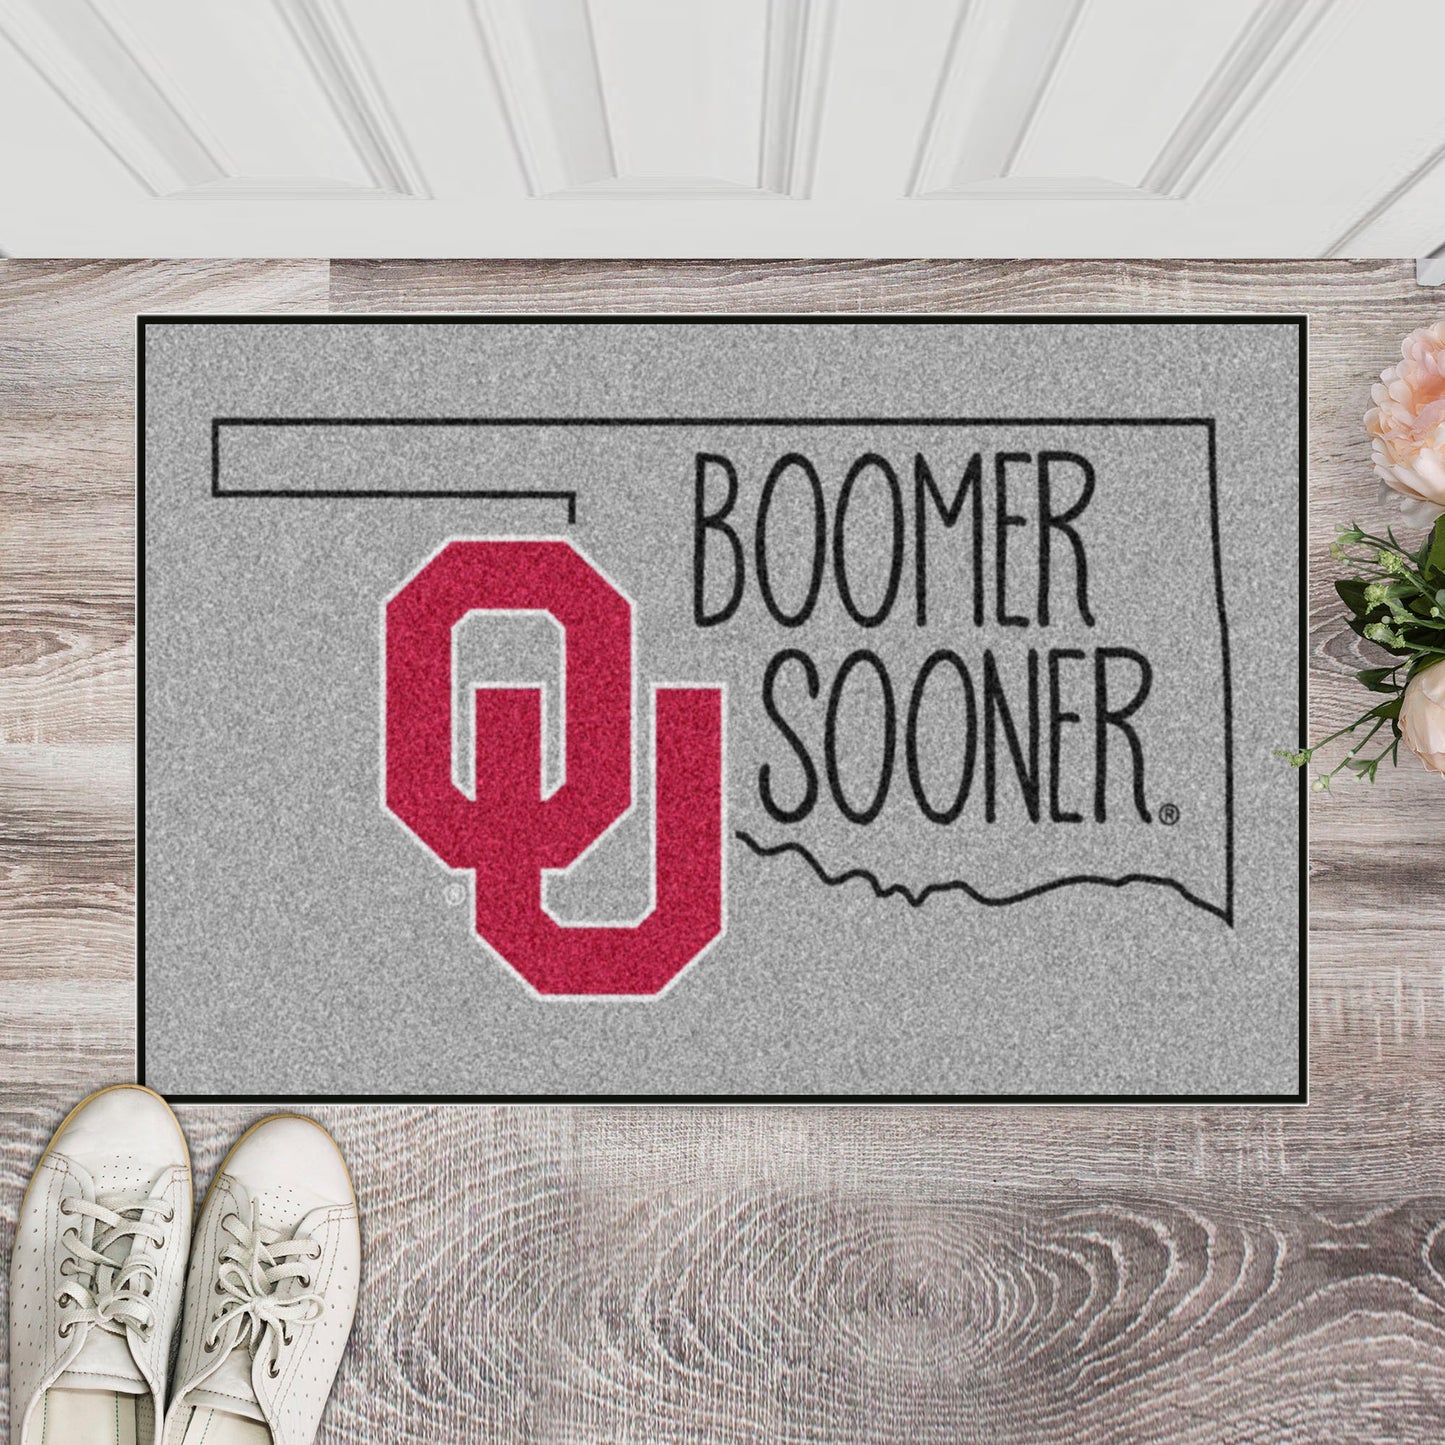 Oklahoma Sooners Southern Style Starter Mat Accent Rug - 19in. x 30in.